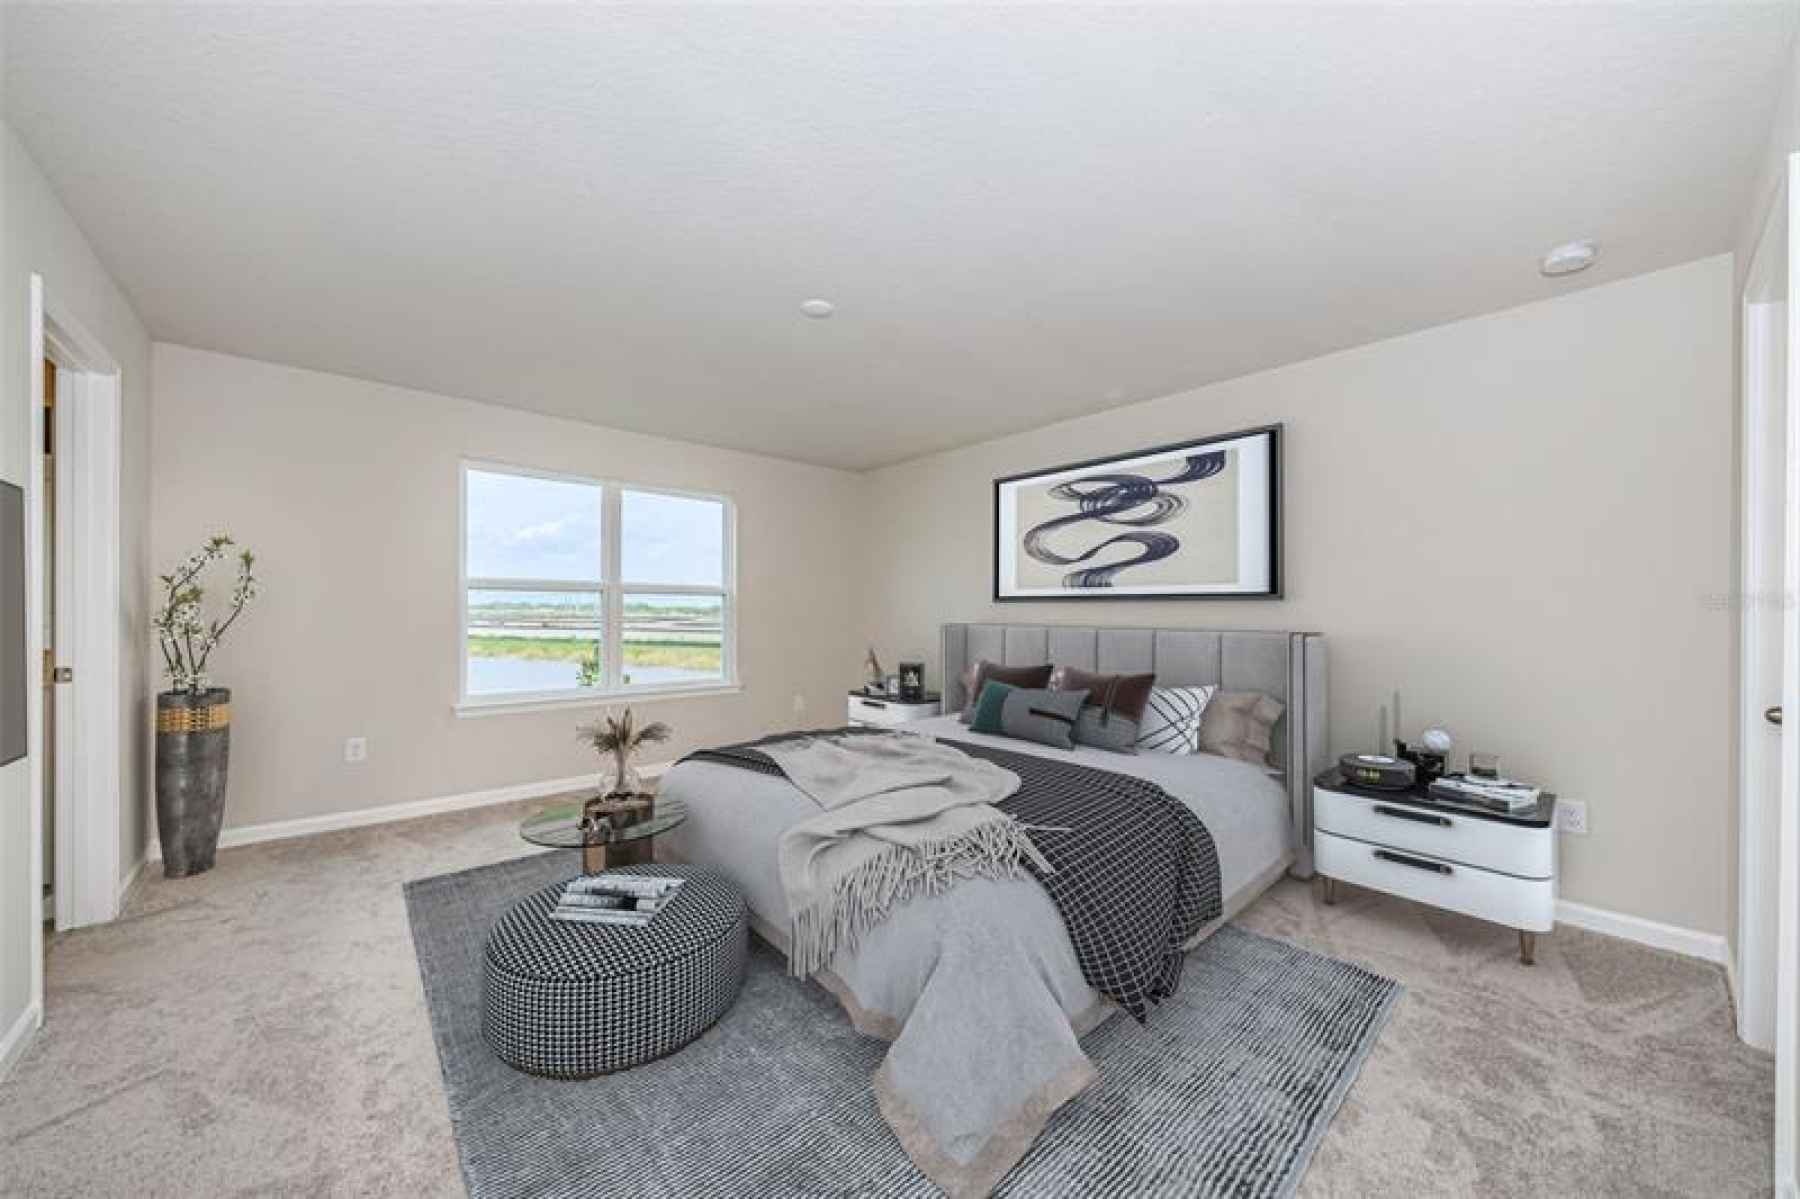 A spacious Owner's suite on the 2nd living level offers lots of natural light and views of the pond